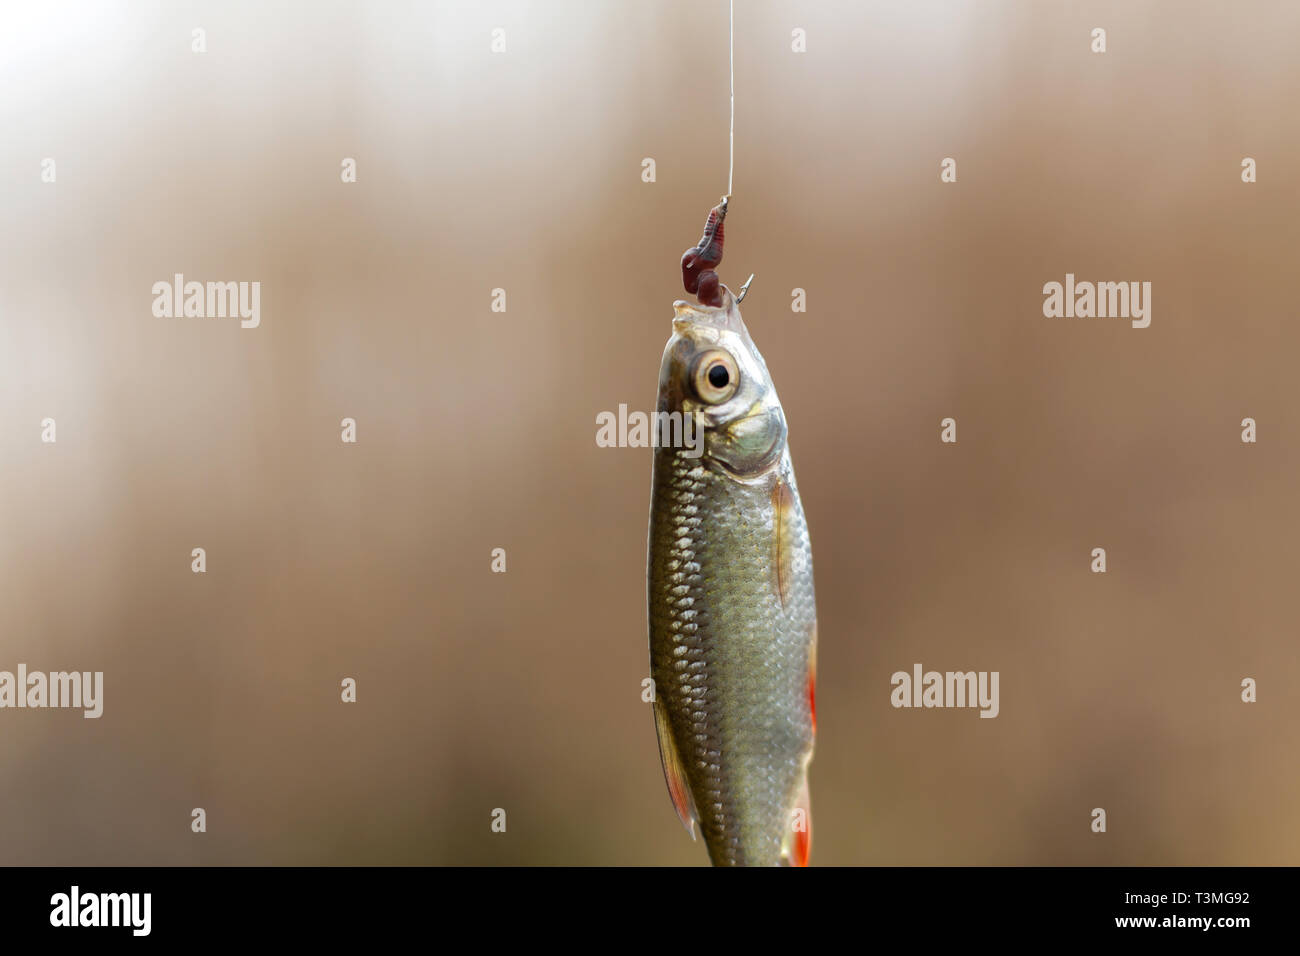 fisherman caught a small fish on the hook with a worm Stock Photo